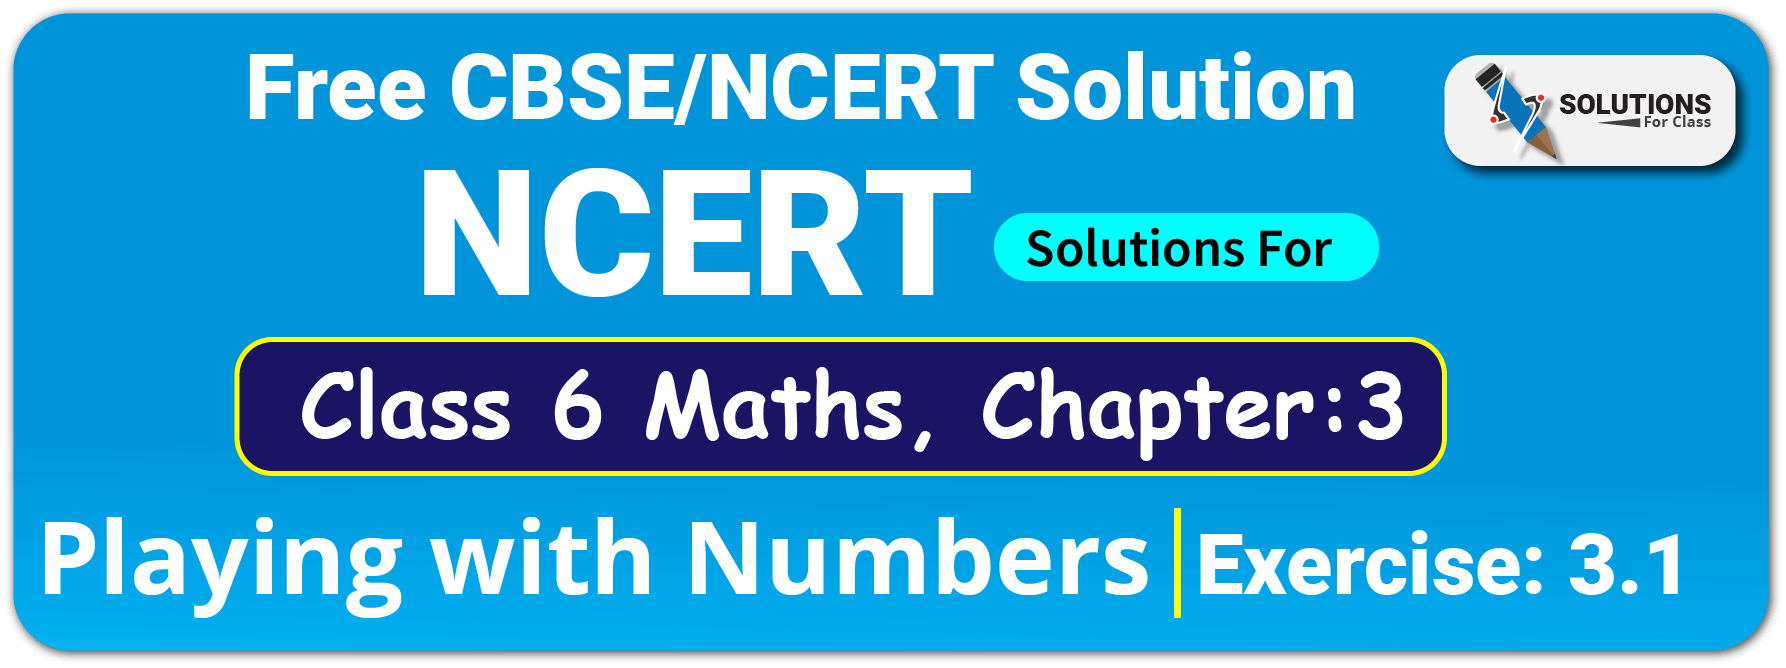 NCERT Solutions Class 6 Maths Ch. 3 Playing with Numbers Ex. 3.1